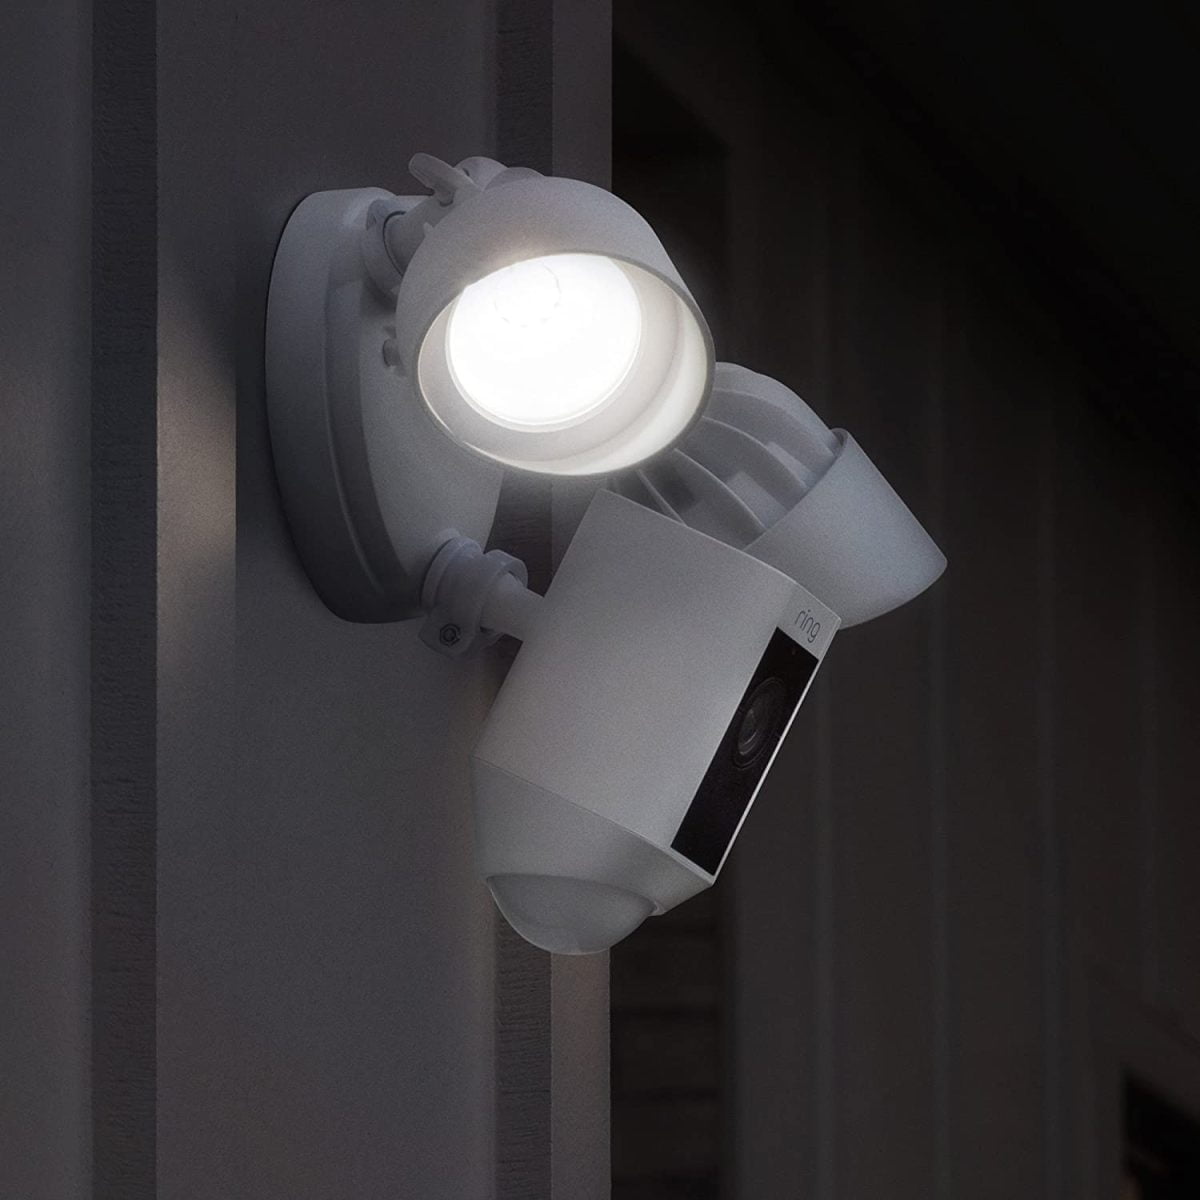 Ring &Lt;H1&Gt;Ring Floodlight Cam Wired Plus - White&Lt;/H1&Gt; Https://Www.youtube.com/Watch?V=4U4M5X6Enr8 &Lt;Ul Class=&Quot;A-Unordered-List A-Vertical A-Spacing-Mini&Quot;&Gt; &Lt;Li&Gt;&Lt;Span Class=&Quot;A-List-Item&Quot;&Gt;1080P Hd Security Camera With Two-Way Talk, Motion-Activated Led Floodlights And Security Siren, Wifi Connectivity And Customisable Motion Zones To Focus On What Matters Most.&Lt;/Span&Gt;&Lt;/Li&Gt; &Lt;Li&Gt;&Lt;Span Class=&Quot;A-List-Item&Quot;&Gt;With 1080P Hd Video And Two-Way Talk You Can See And Speak To Visitors Night And Day, Home Or Away.&Lt;/Span&Gt;&Lt;/Li&Gt; &Lt;Li&Gt;&Lt;Span Class=&Quot;A-List-Item&Quot;&Gt;2000 Lumen Motion-Activated Led Floodlights With Brightness Control And A Security Siren For Protection When You Need It Most.&Lt;/Span&Gt;&Lt;/Li&Gt; &Lt;Li&Gt;&Lt;Span Class=&Quot;A-List-Item&Quot;&Gt;Customisable Motion Zones Allow You To Fine-Tune Your Motion Detection To The Areas You Want To Focus On.&Lt;/Span&Gt;&Lt;/Li&Gt; &Lt;Li&Gt;&Lt;Span Class=&Quot;A-List-Item&Quot;&Gt;Hardwire To Existing Wiring For Non-Stop Protection And Peace Of Mind.&Lt;/Span&Gt;&Lt;/Li&Gt; &Lt;Li&Gt;&Lt;Span Class=&Quot;A-List-Item&Quot;&Gt;Pair With A Ring Chime To Hear Audio Notifications In Your Home, And Add Voice Commands With A Compatible Alexa-Enabled Device.&Lt;/Span&Gt;&Lt;/Li&Gt; &Lt;Li&Gt;&Lt;Span Class=&Quot;A-List-Item&Quot;&Gt;Standard Features Such As Real-Time Notifications, Live View And Two-Way Talk Are Available Out Of The Box And At No Additional Cost On All Compatible Ring Devices. Add A Ring Protect Plan (Subscription Sold Separately) To Record, Review And Share The Moment You Missed (30-Day Free Trial Included In Your Purchase).&Lt;/Span&Gt;&Lt;/Li&Gt; &Lt;/Ul&Gt; &Lt;Strong&Gt;&Lt;Span Class=&Quot;A-List-Item&Quot;&Gt;One Year Warranty&Lt;/Span&Gt;&Lt;/Strong&Gt; &Lt;Strong&Gt;&Lt;Span Class=&Quot;A-List-Item&Quot;&Gt; &Lt;B&Gt;We Also Provide International Wholesale And Retail Shipping To All Gcc Countries: Saudi Arabia, Qatar, Oman, Kuwait, Bahrain.&Lt;/B&Gt;&Lt;/Span&Gt;&Lt;/Strong&Gt; Ring Floodlight Cam Wired Plus Ring Floodlight Cam Wired Plus -White